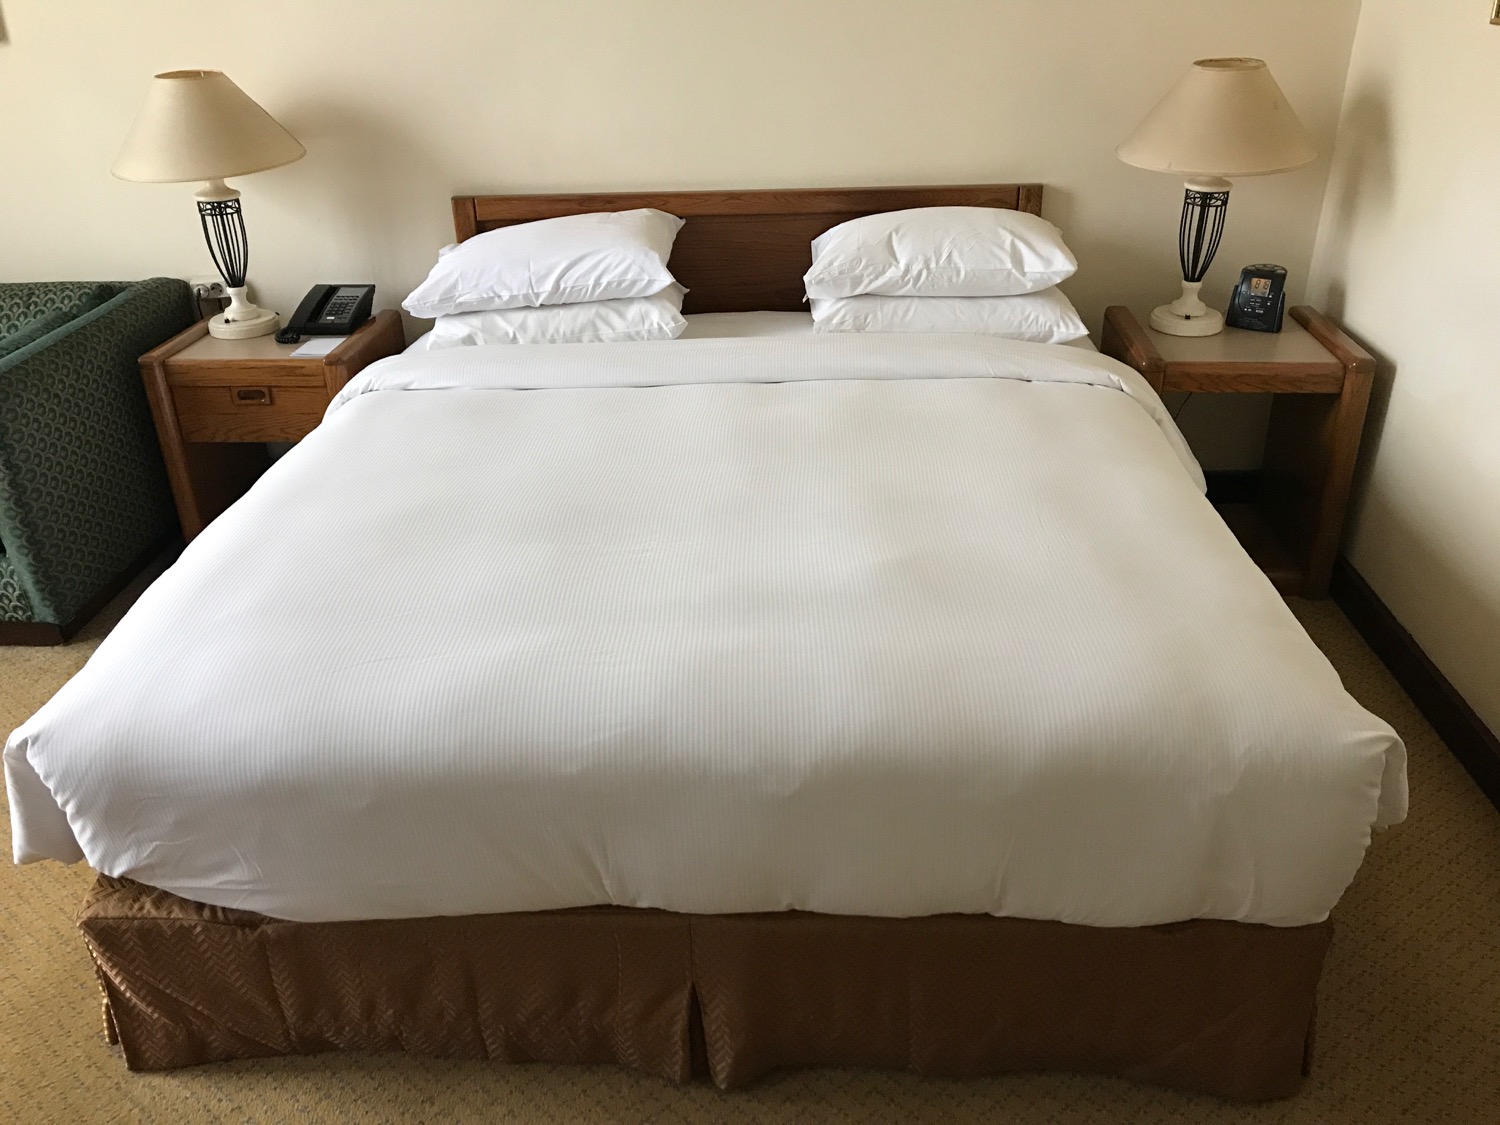 a bed with white sheets and lamps